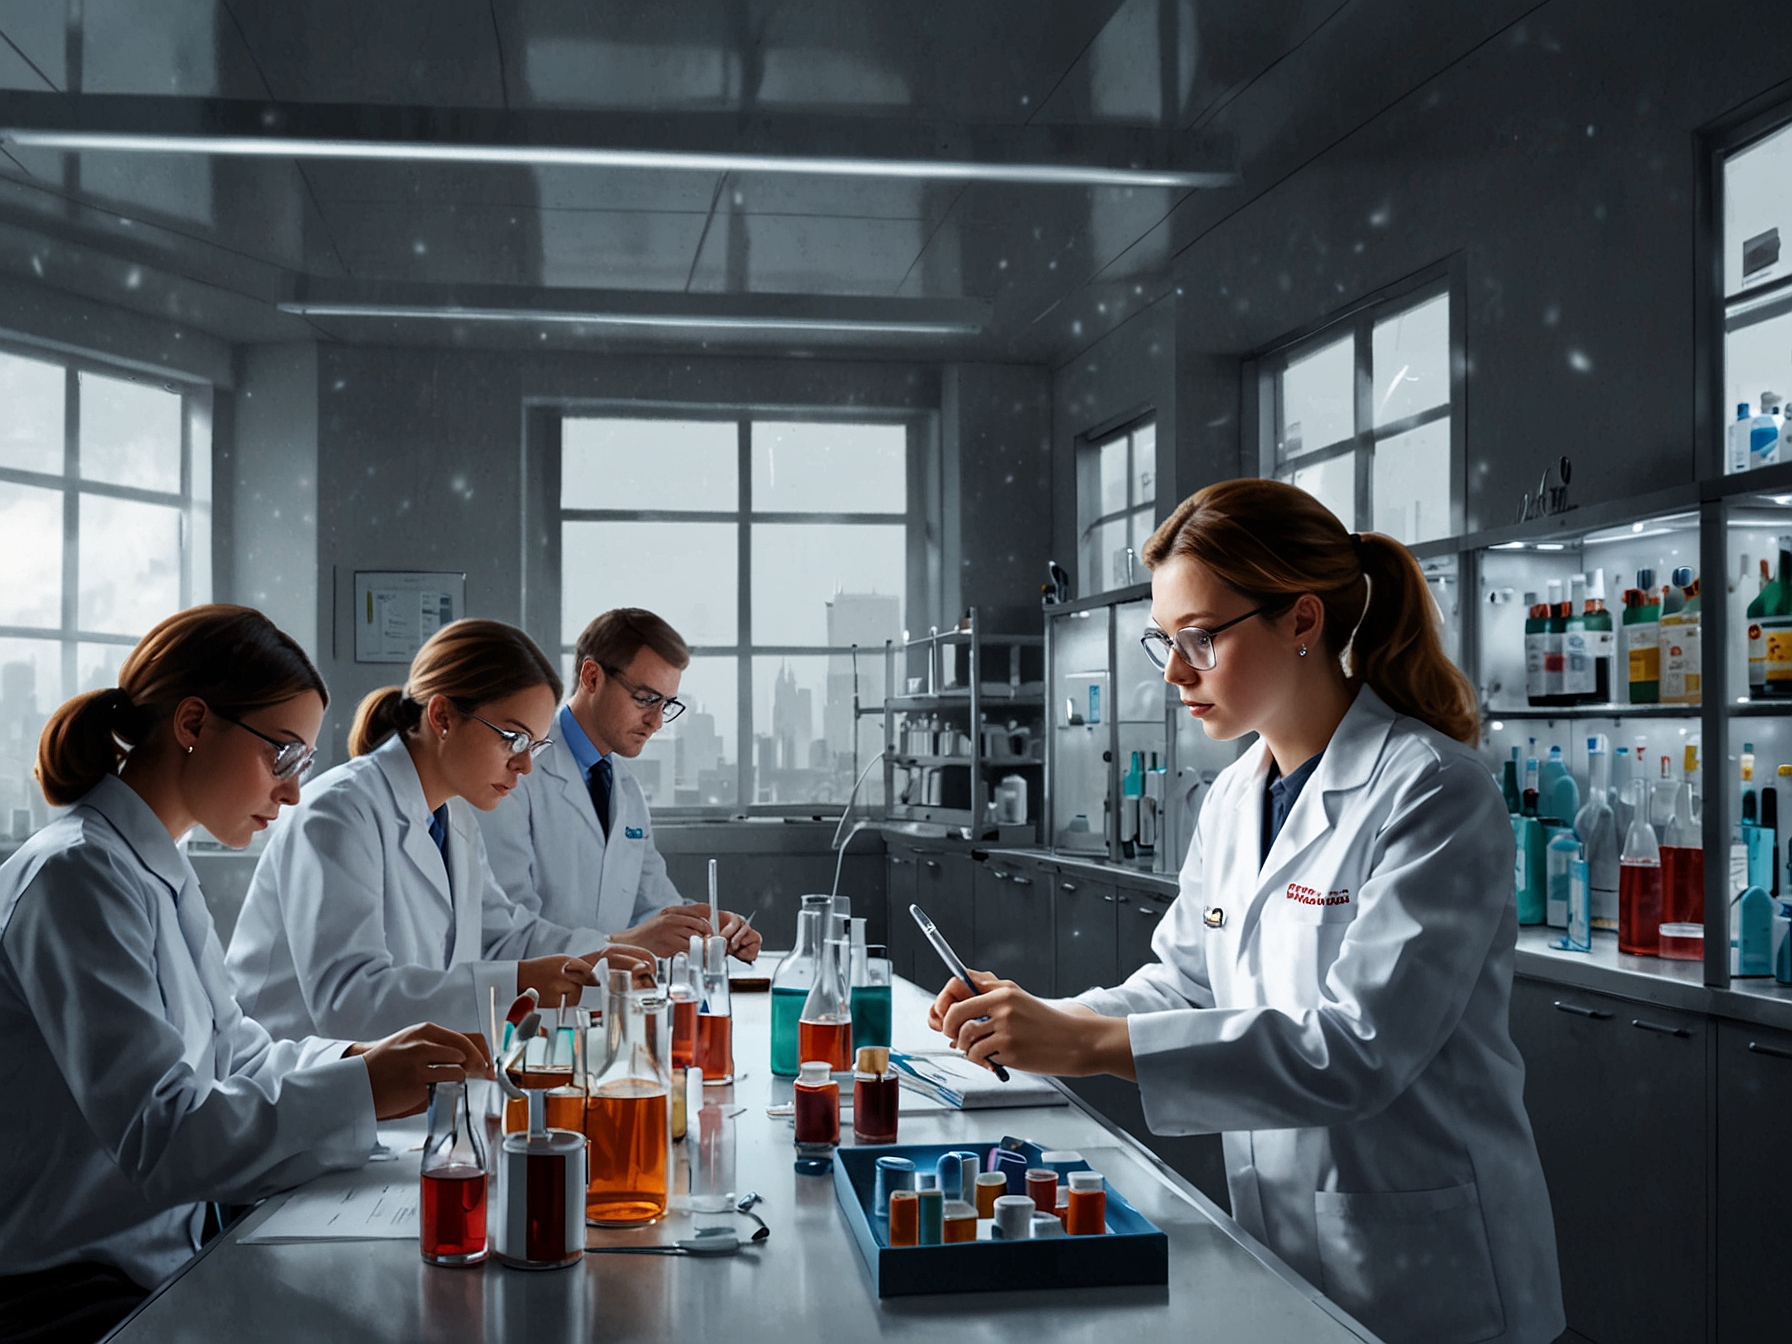 A group of scientists working in a state-of-the-art Emcure Pharmaceuticals laboratory, emphasizing the company's strong focus on R&D and innovation in the pharmaceutical sector.